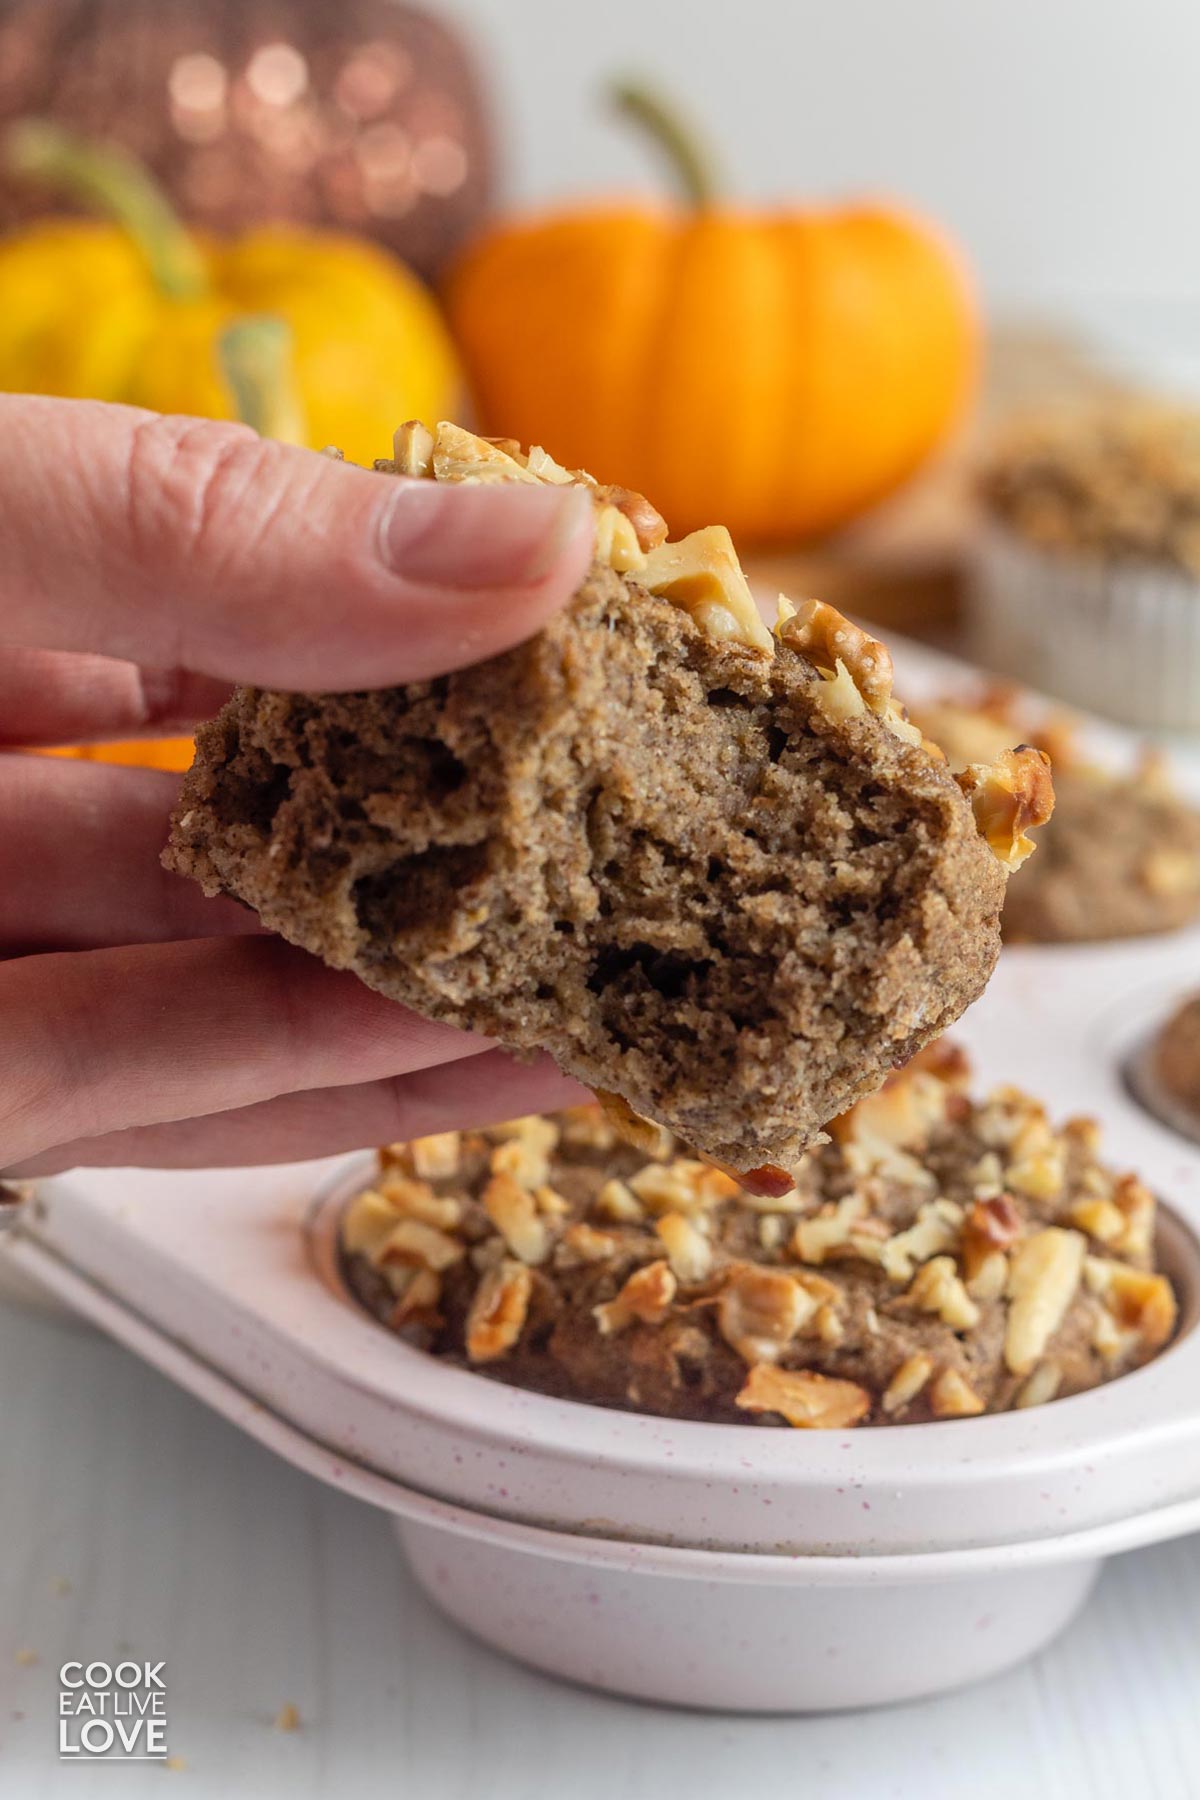 A hand holding up a vegan pumpkin muffin with banana to see the inside.